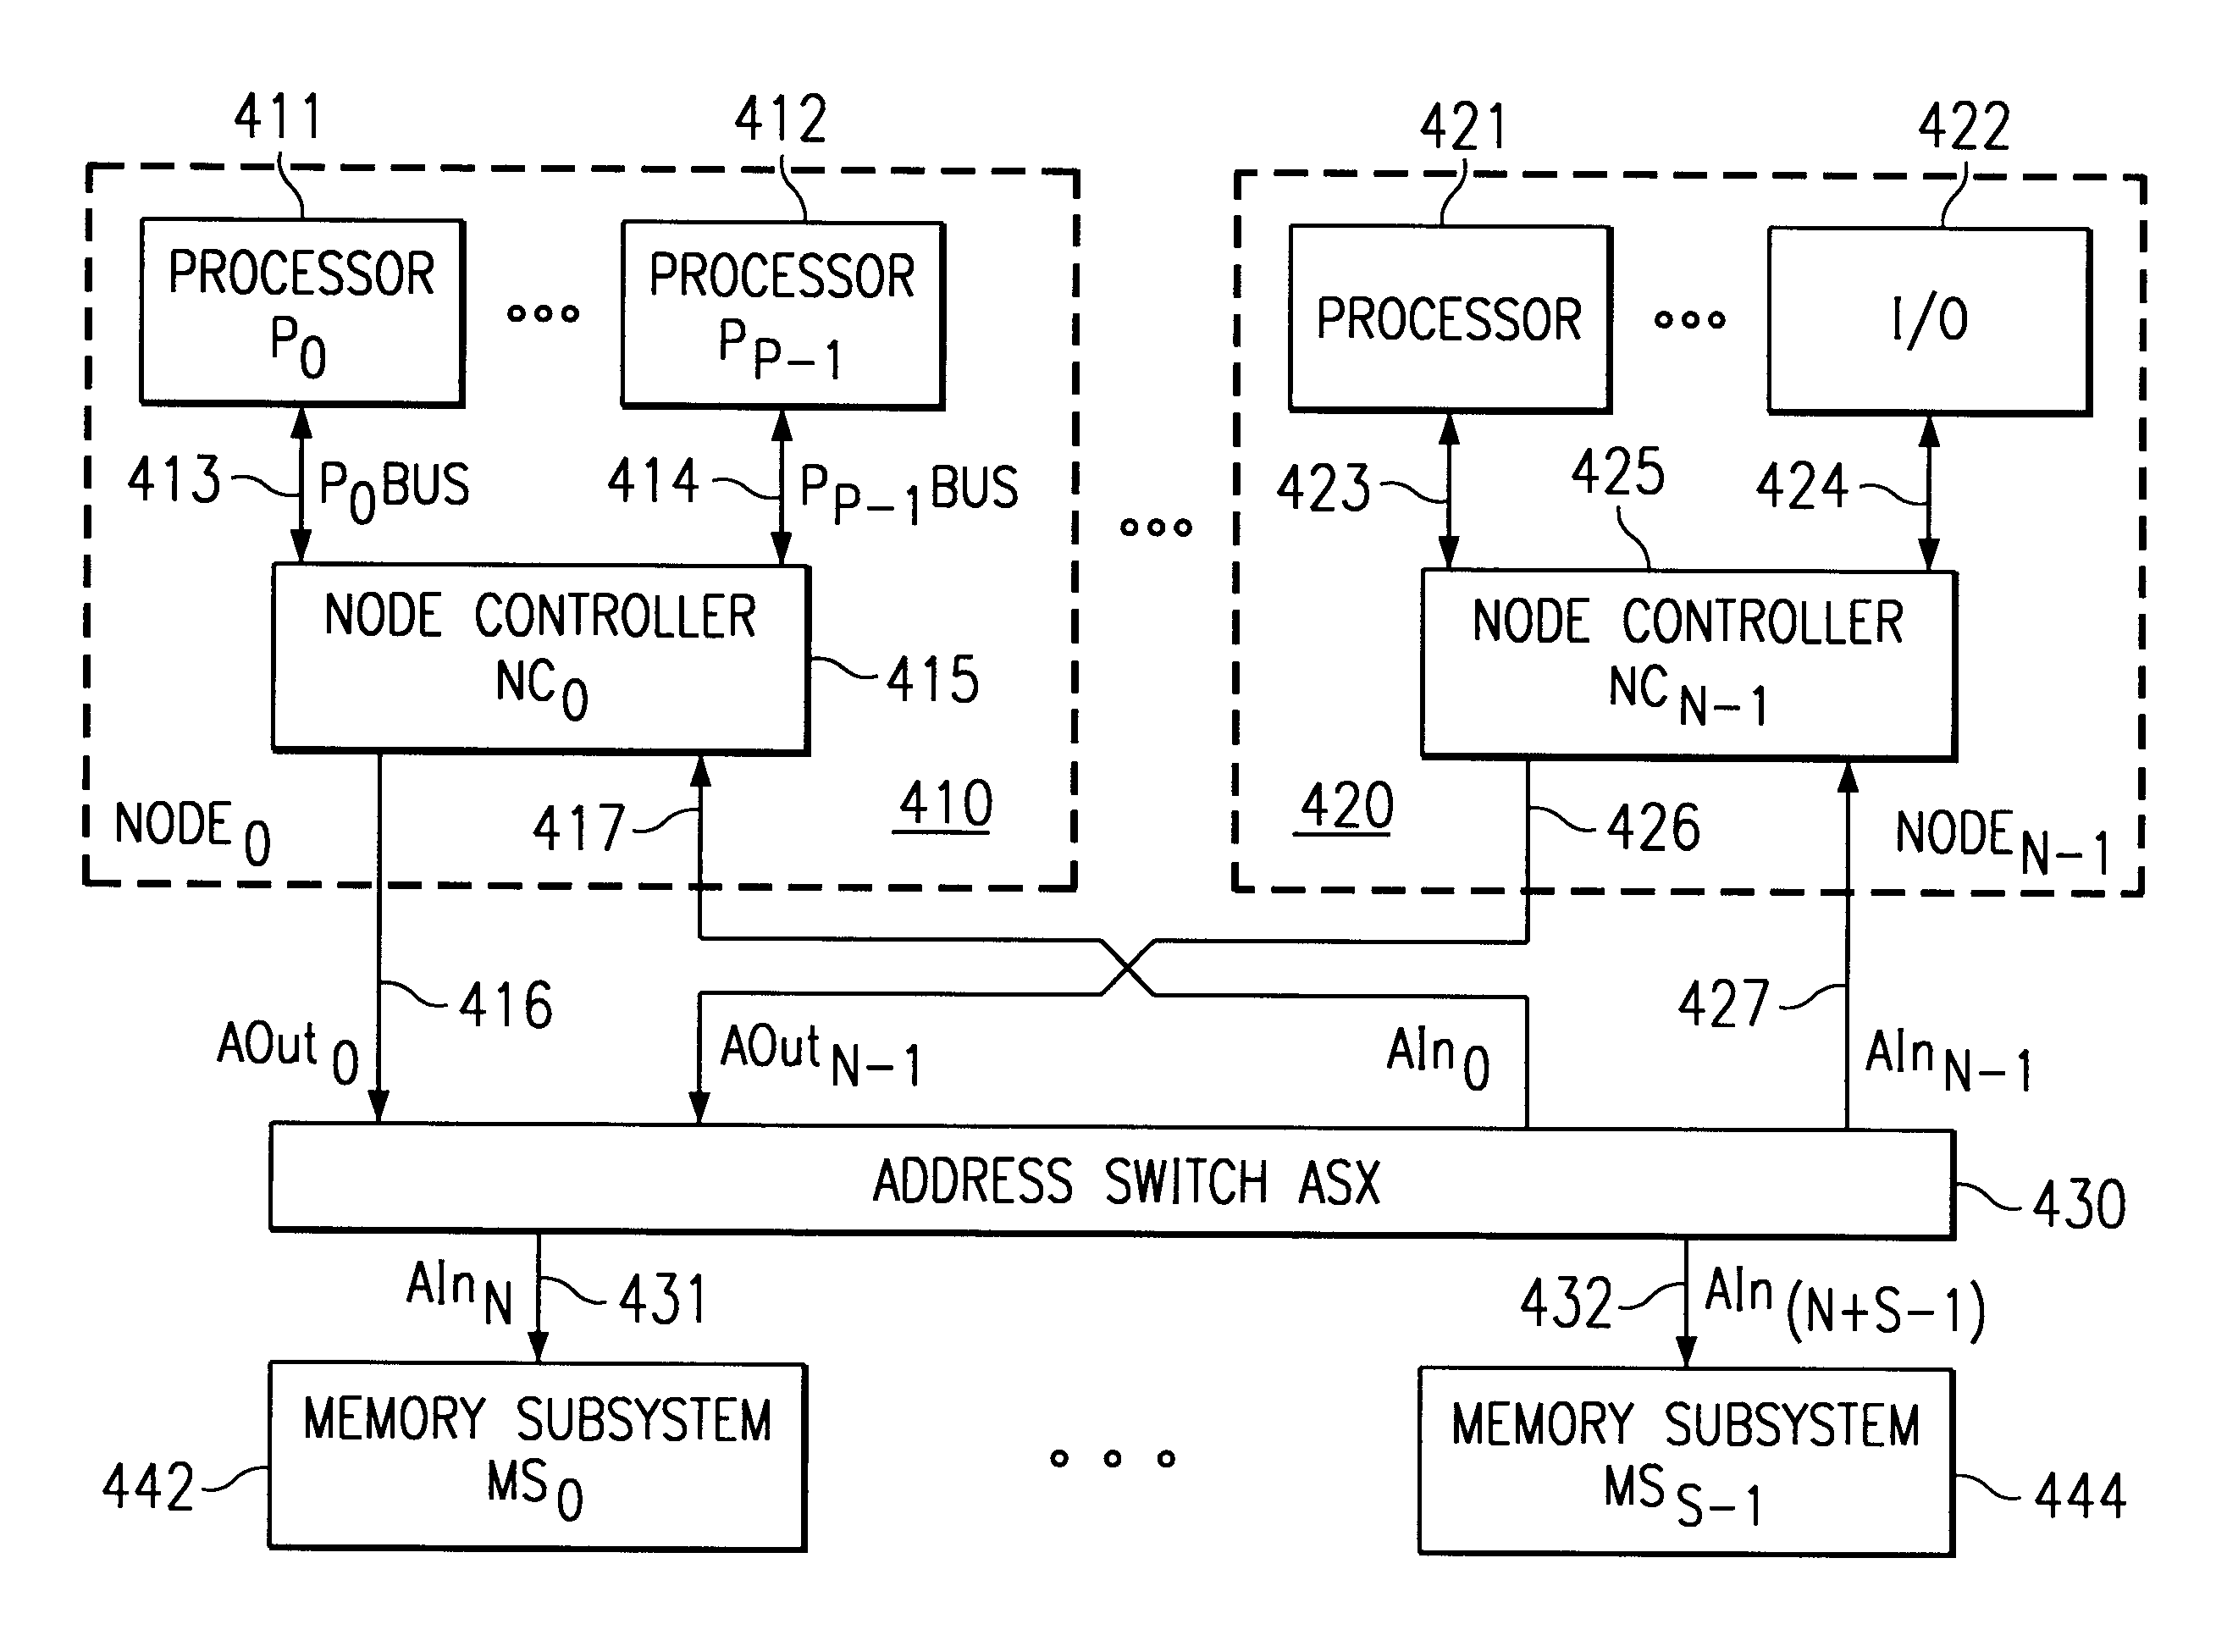 Method and apparatus to distribute interrupts to multiple interrupt handlers in a distributed symmetric multiprocessor system